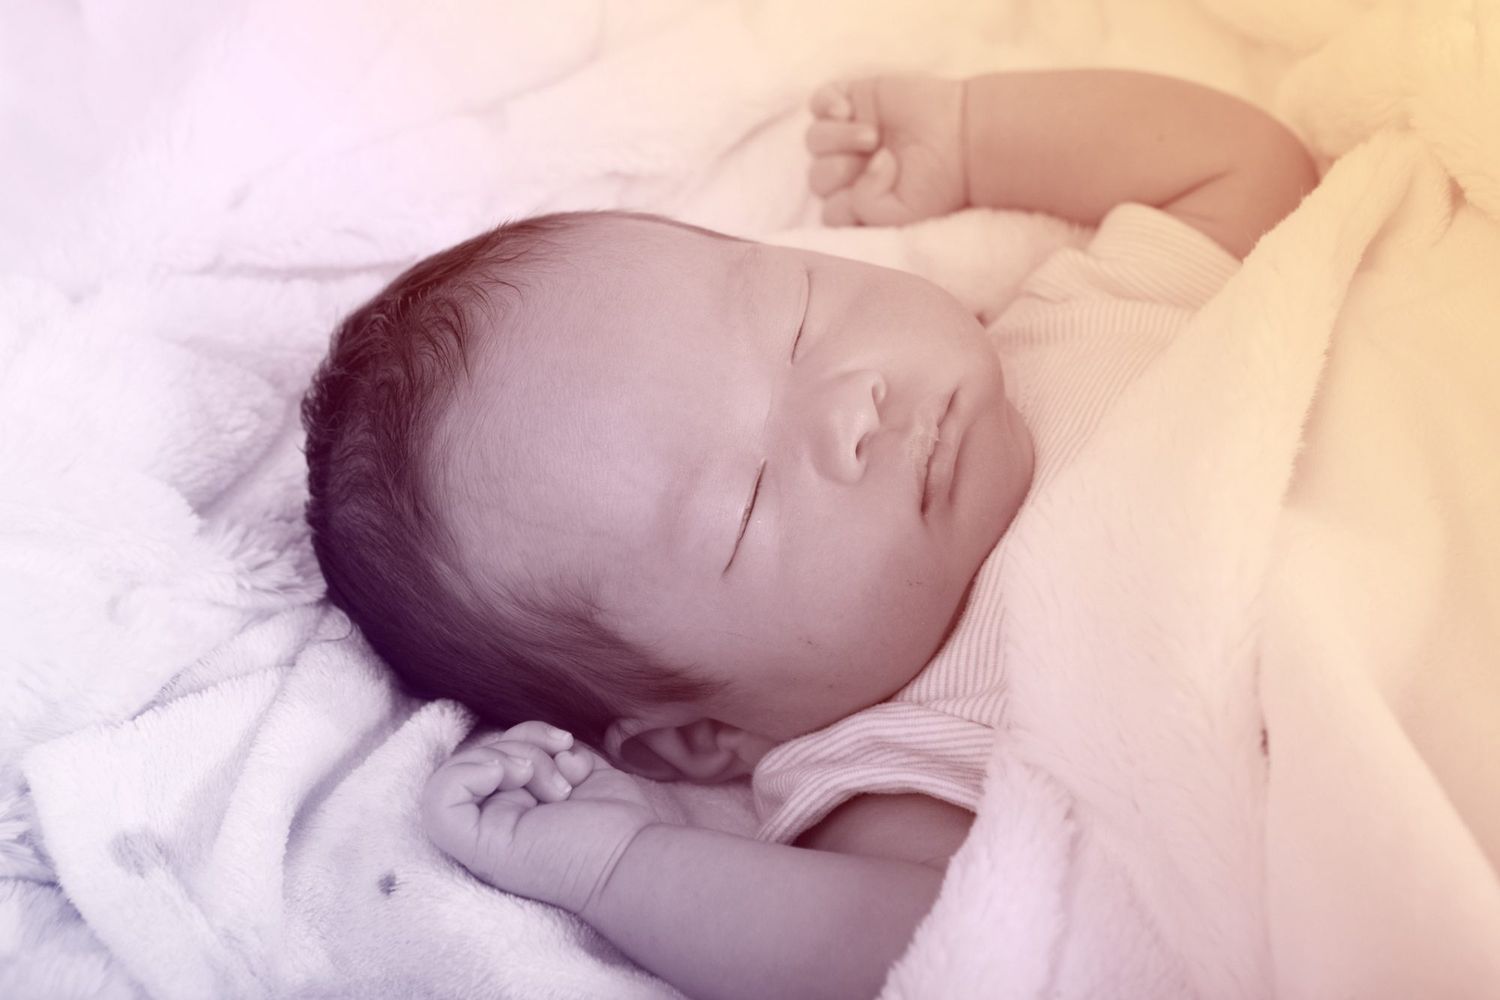 asian infant sleeping with arms up